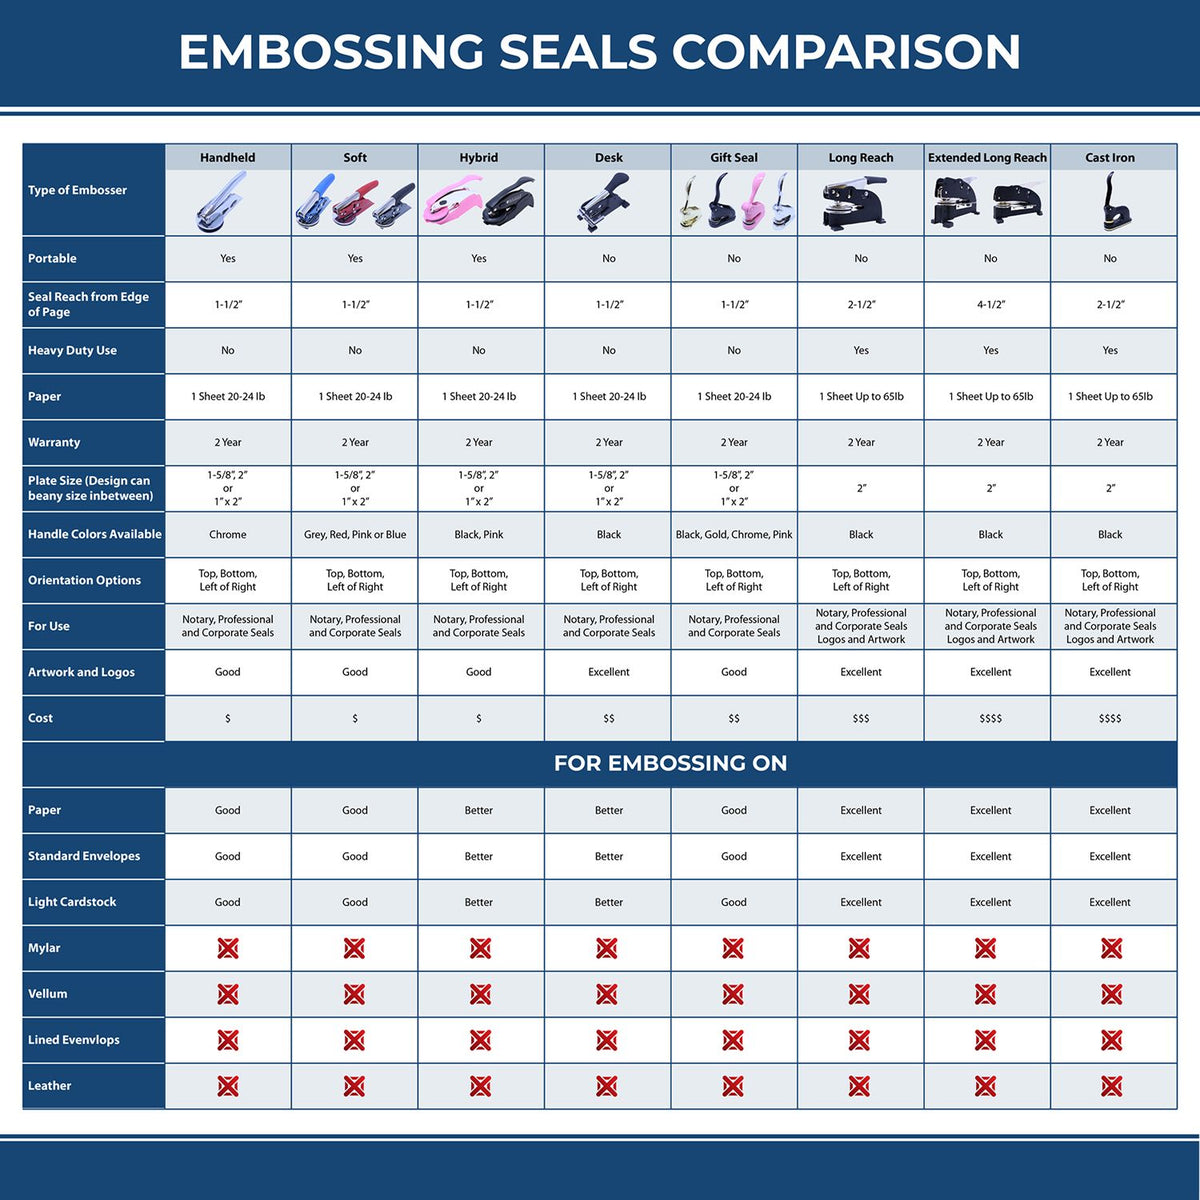 A comparison chart for the different types of mount models available for the Handheld Michigan Professional Geologist Embosser